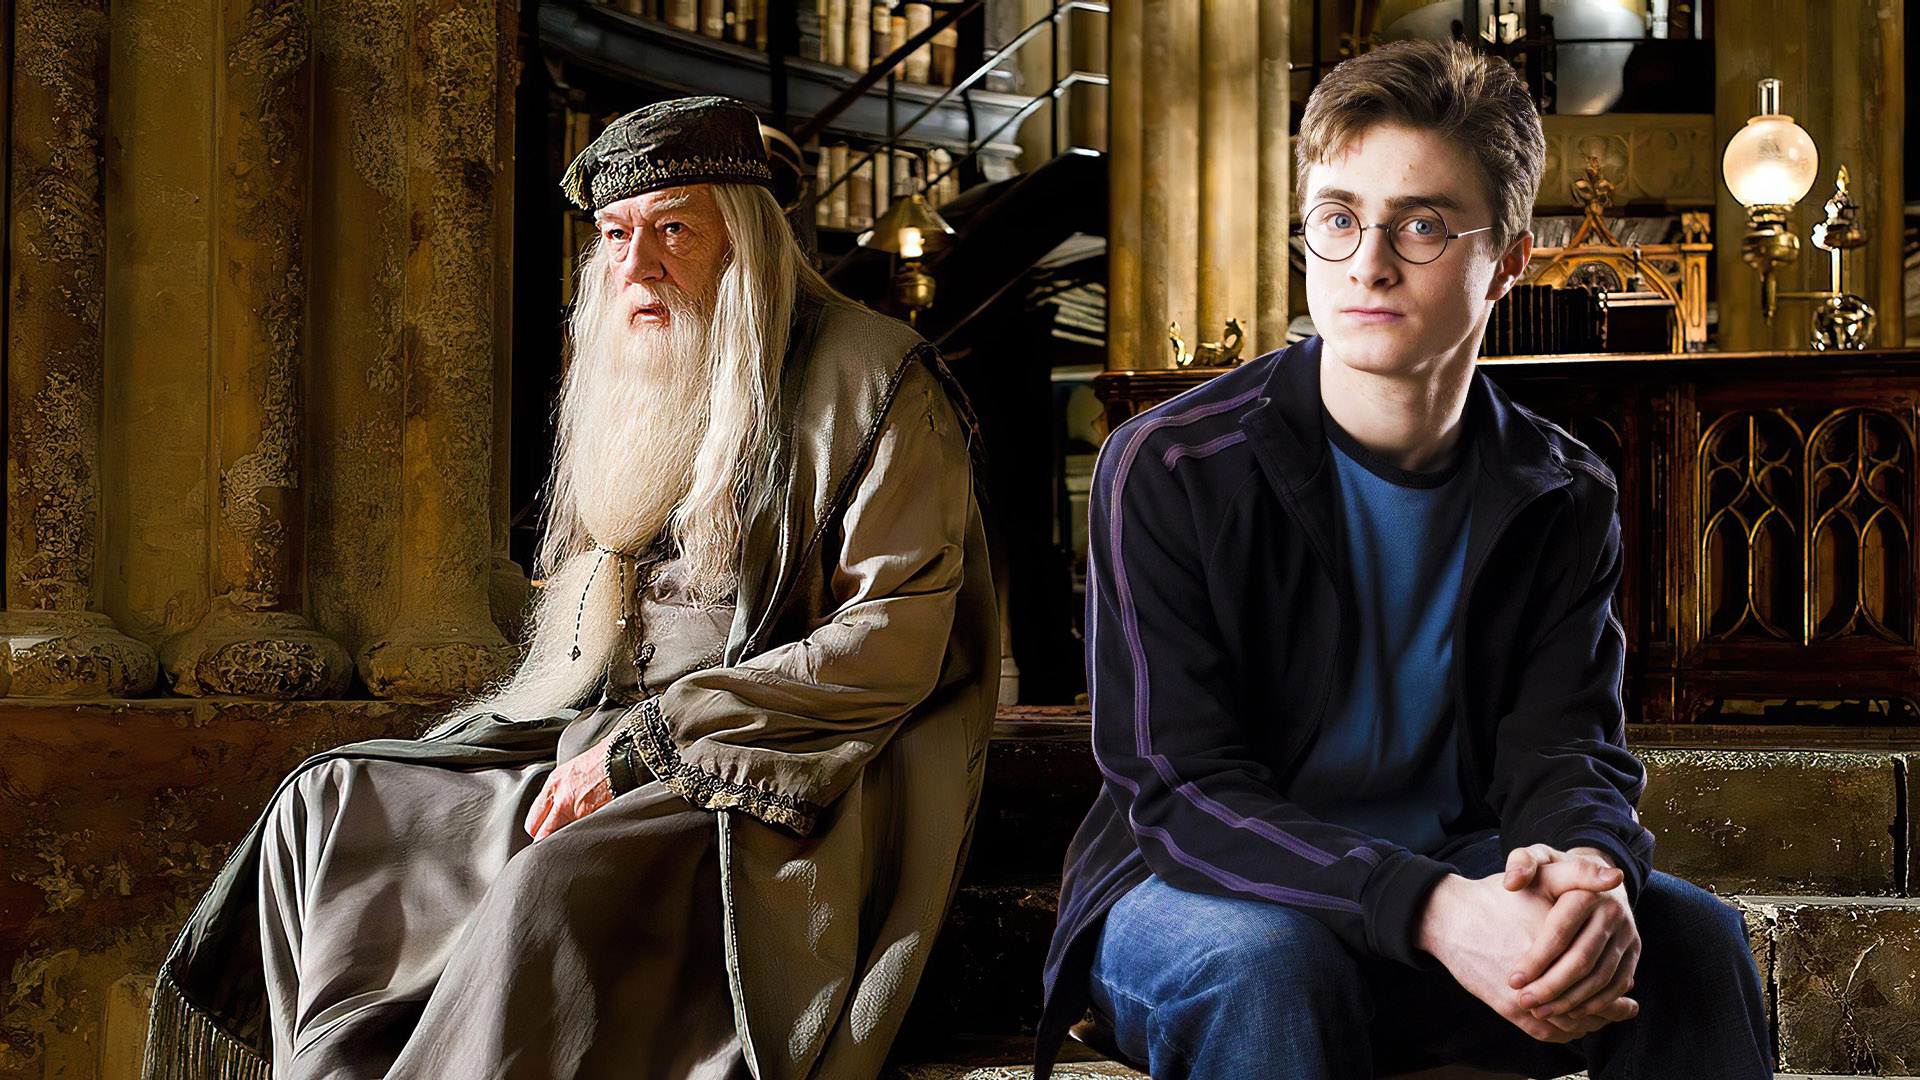 The Worst Advice Given in Harry Potter (We're Looking at You, Dumbledore)